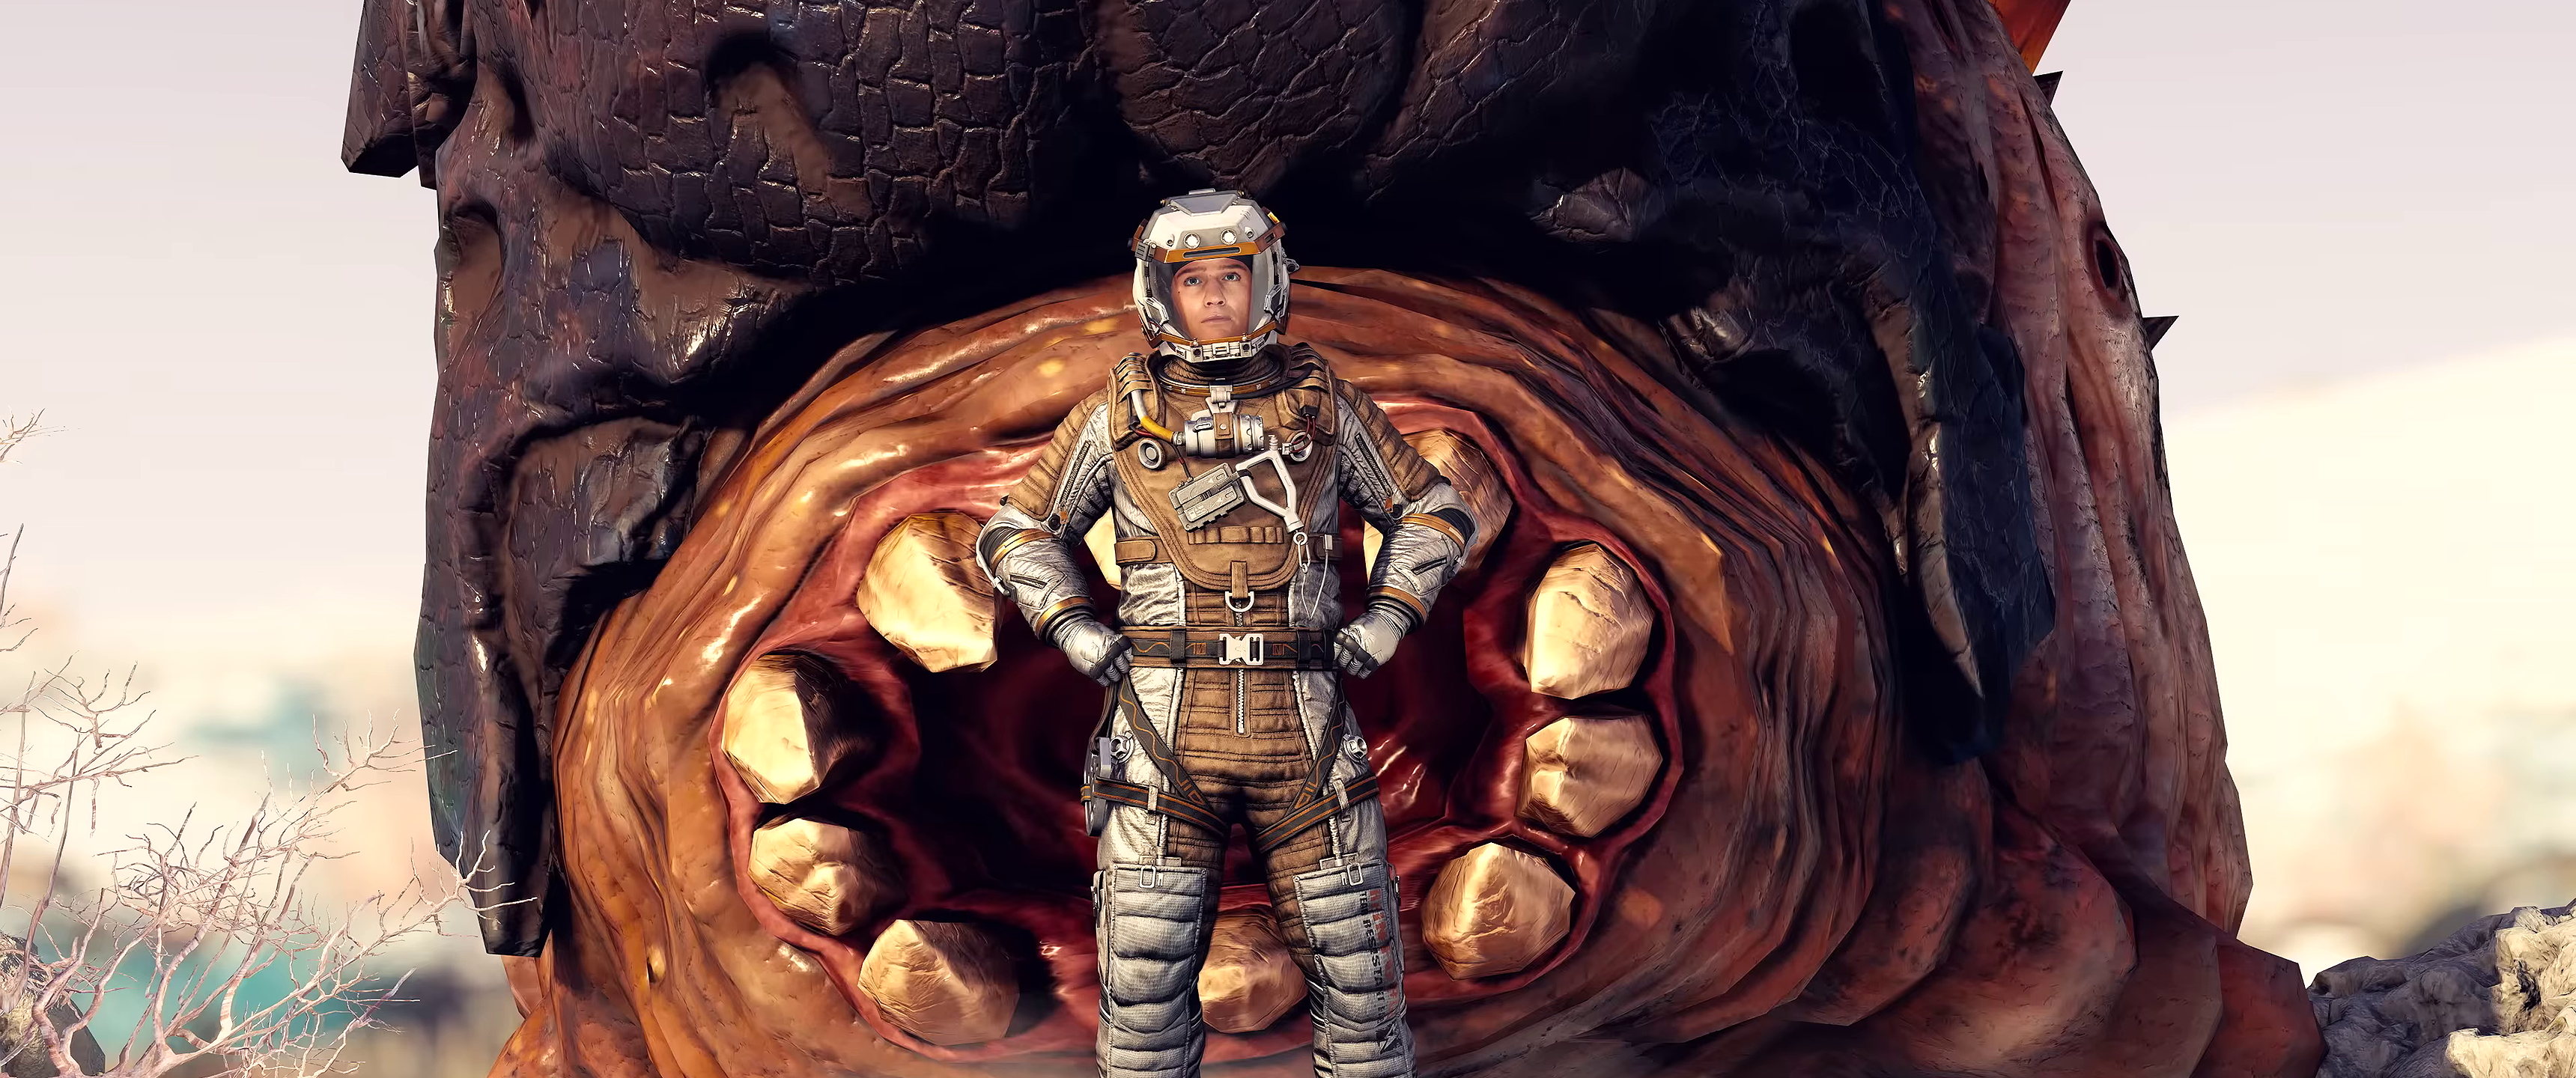 Starfield Bethesda Softworks Space Spacesuit Video Games Creature Hands On Hips CGi Video Game Chara 3440x1440